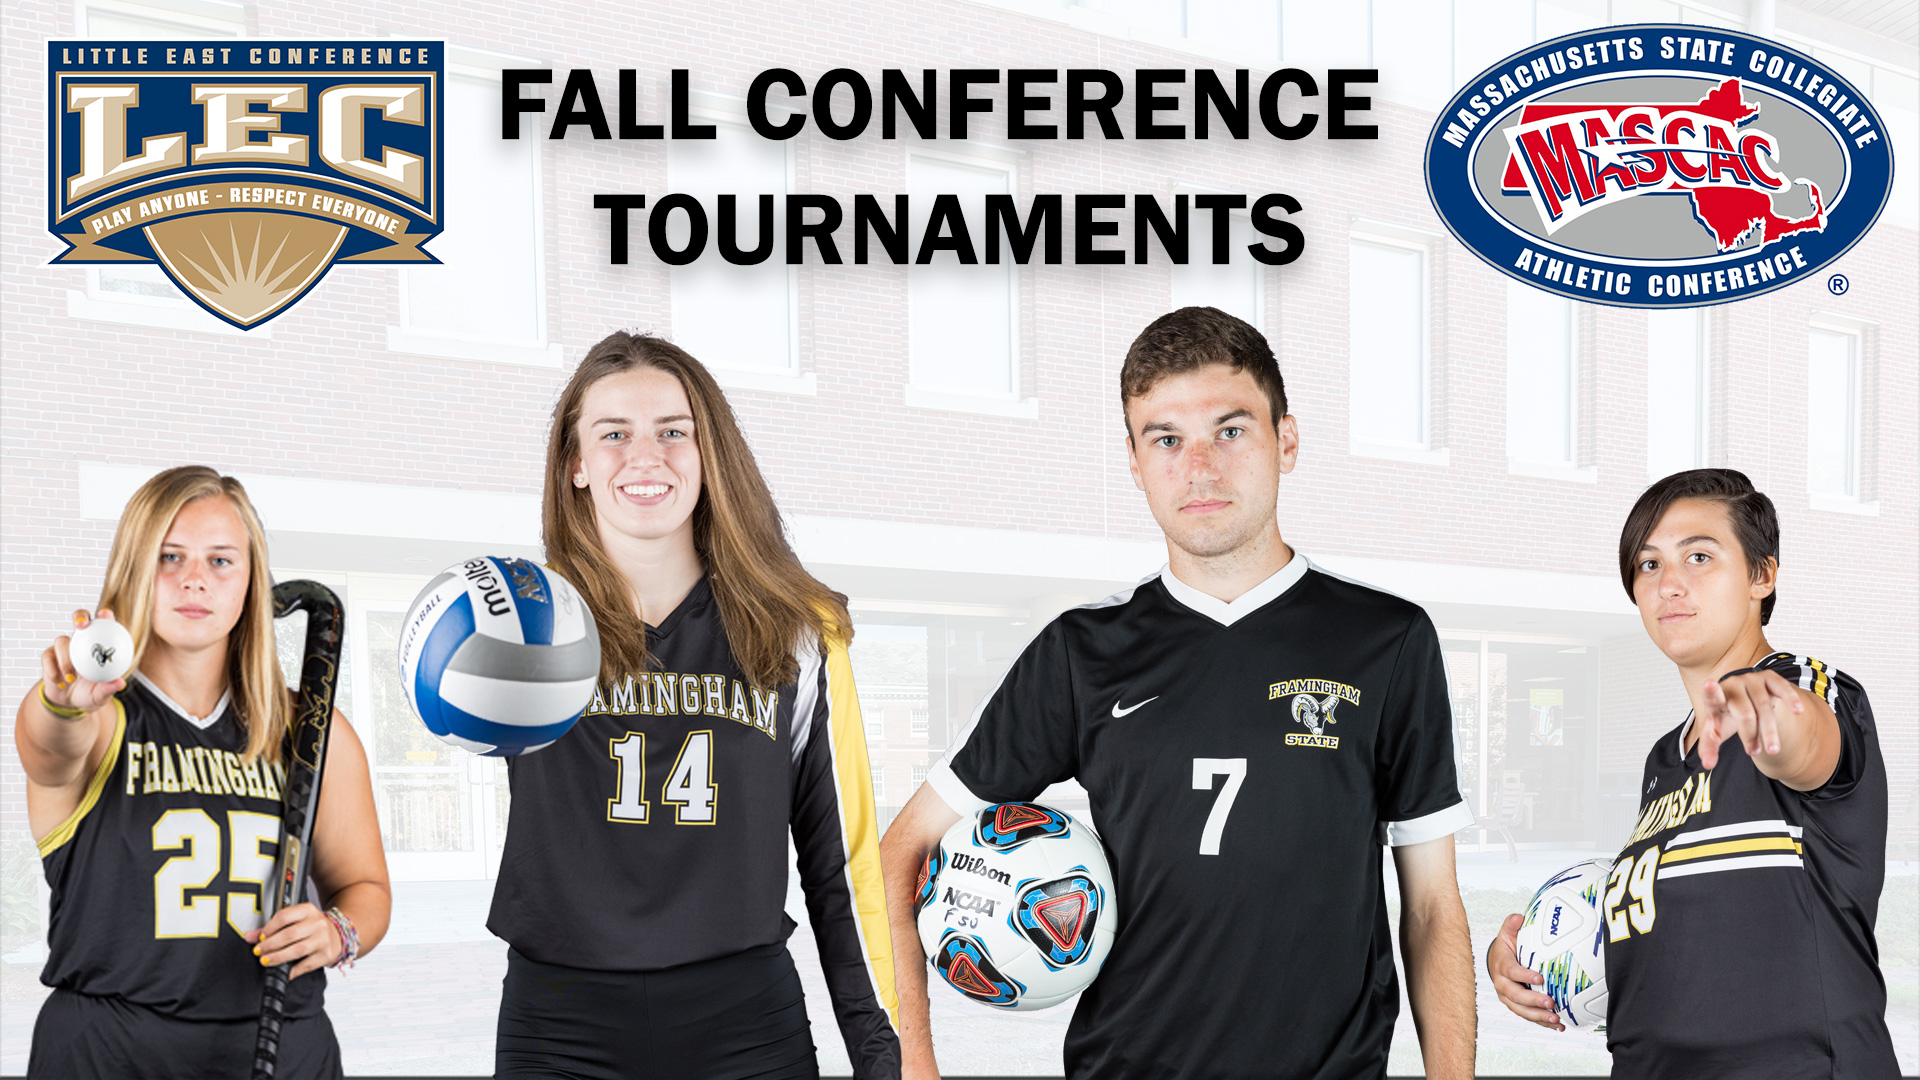 Men's Soccer, Volleyball, Women's Soccer and Field Hockey to Compete in Post Season Tournaments